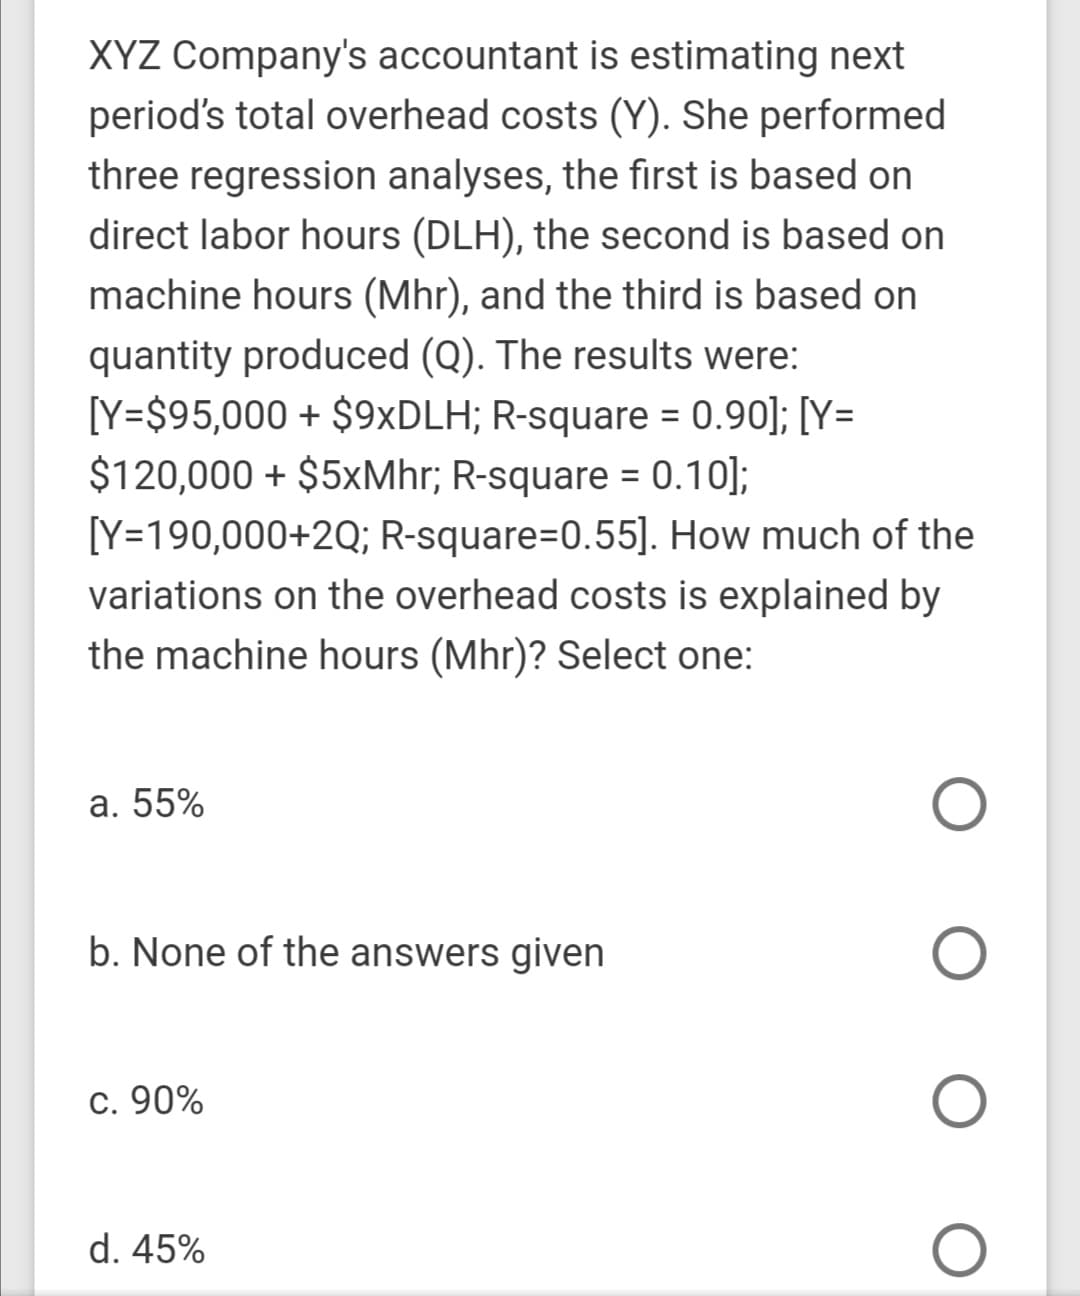 XYZ Company's accountant is estimating next
period's total overhead costs (Y). She performed
three regression analyses, the first is based on
direct labor hours (DLH), the second is based on
machine hours (Mhr), and the third is based on
quantity produced (Q). The results were:
[Y=$95,000 + $9×DLH; R-square = 0.90]; [Y=
$120,000 + $5xMhr; R-square = 0.10];
[Y=190,000+2Q; R-square=0.55]. How much of the
variations on the overhead costs is explained by
%3D
the machine hours (Mhr)? Select one:
a. 55%
b. None of the answers given
c. 90%
d. 45%
